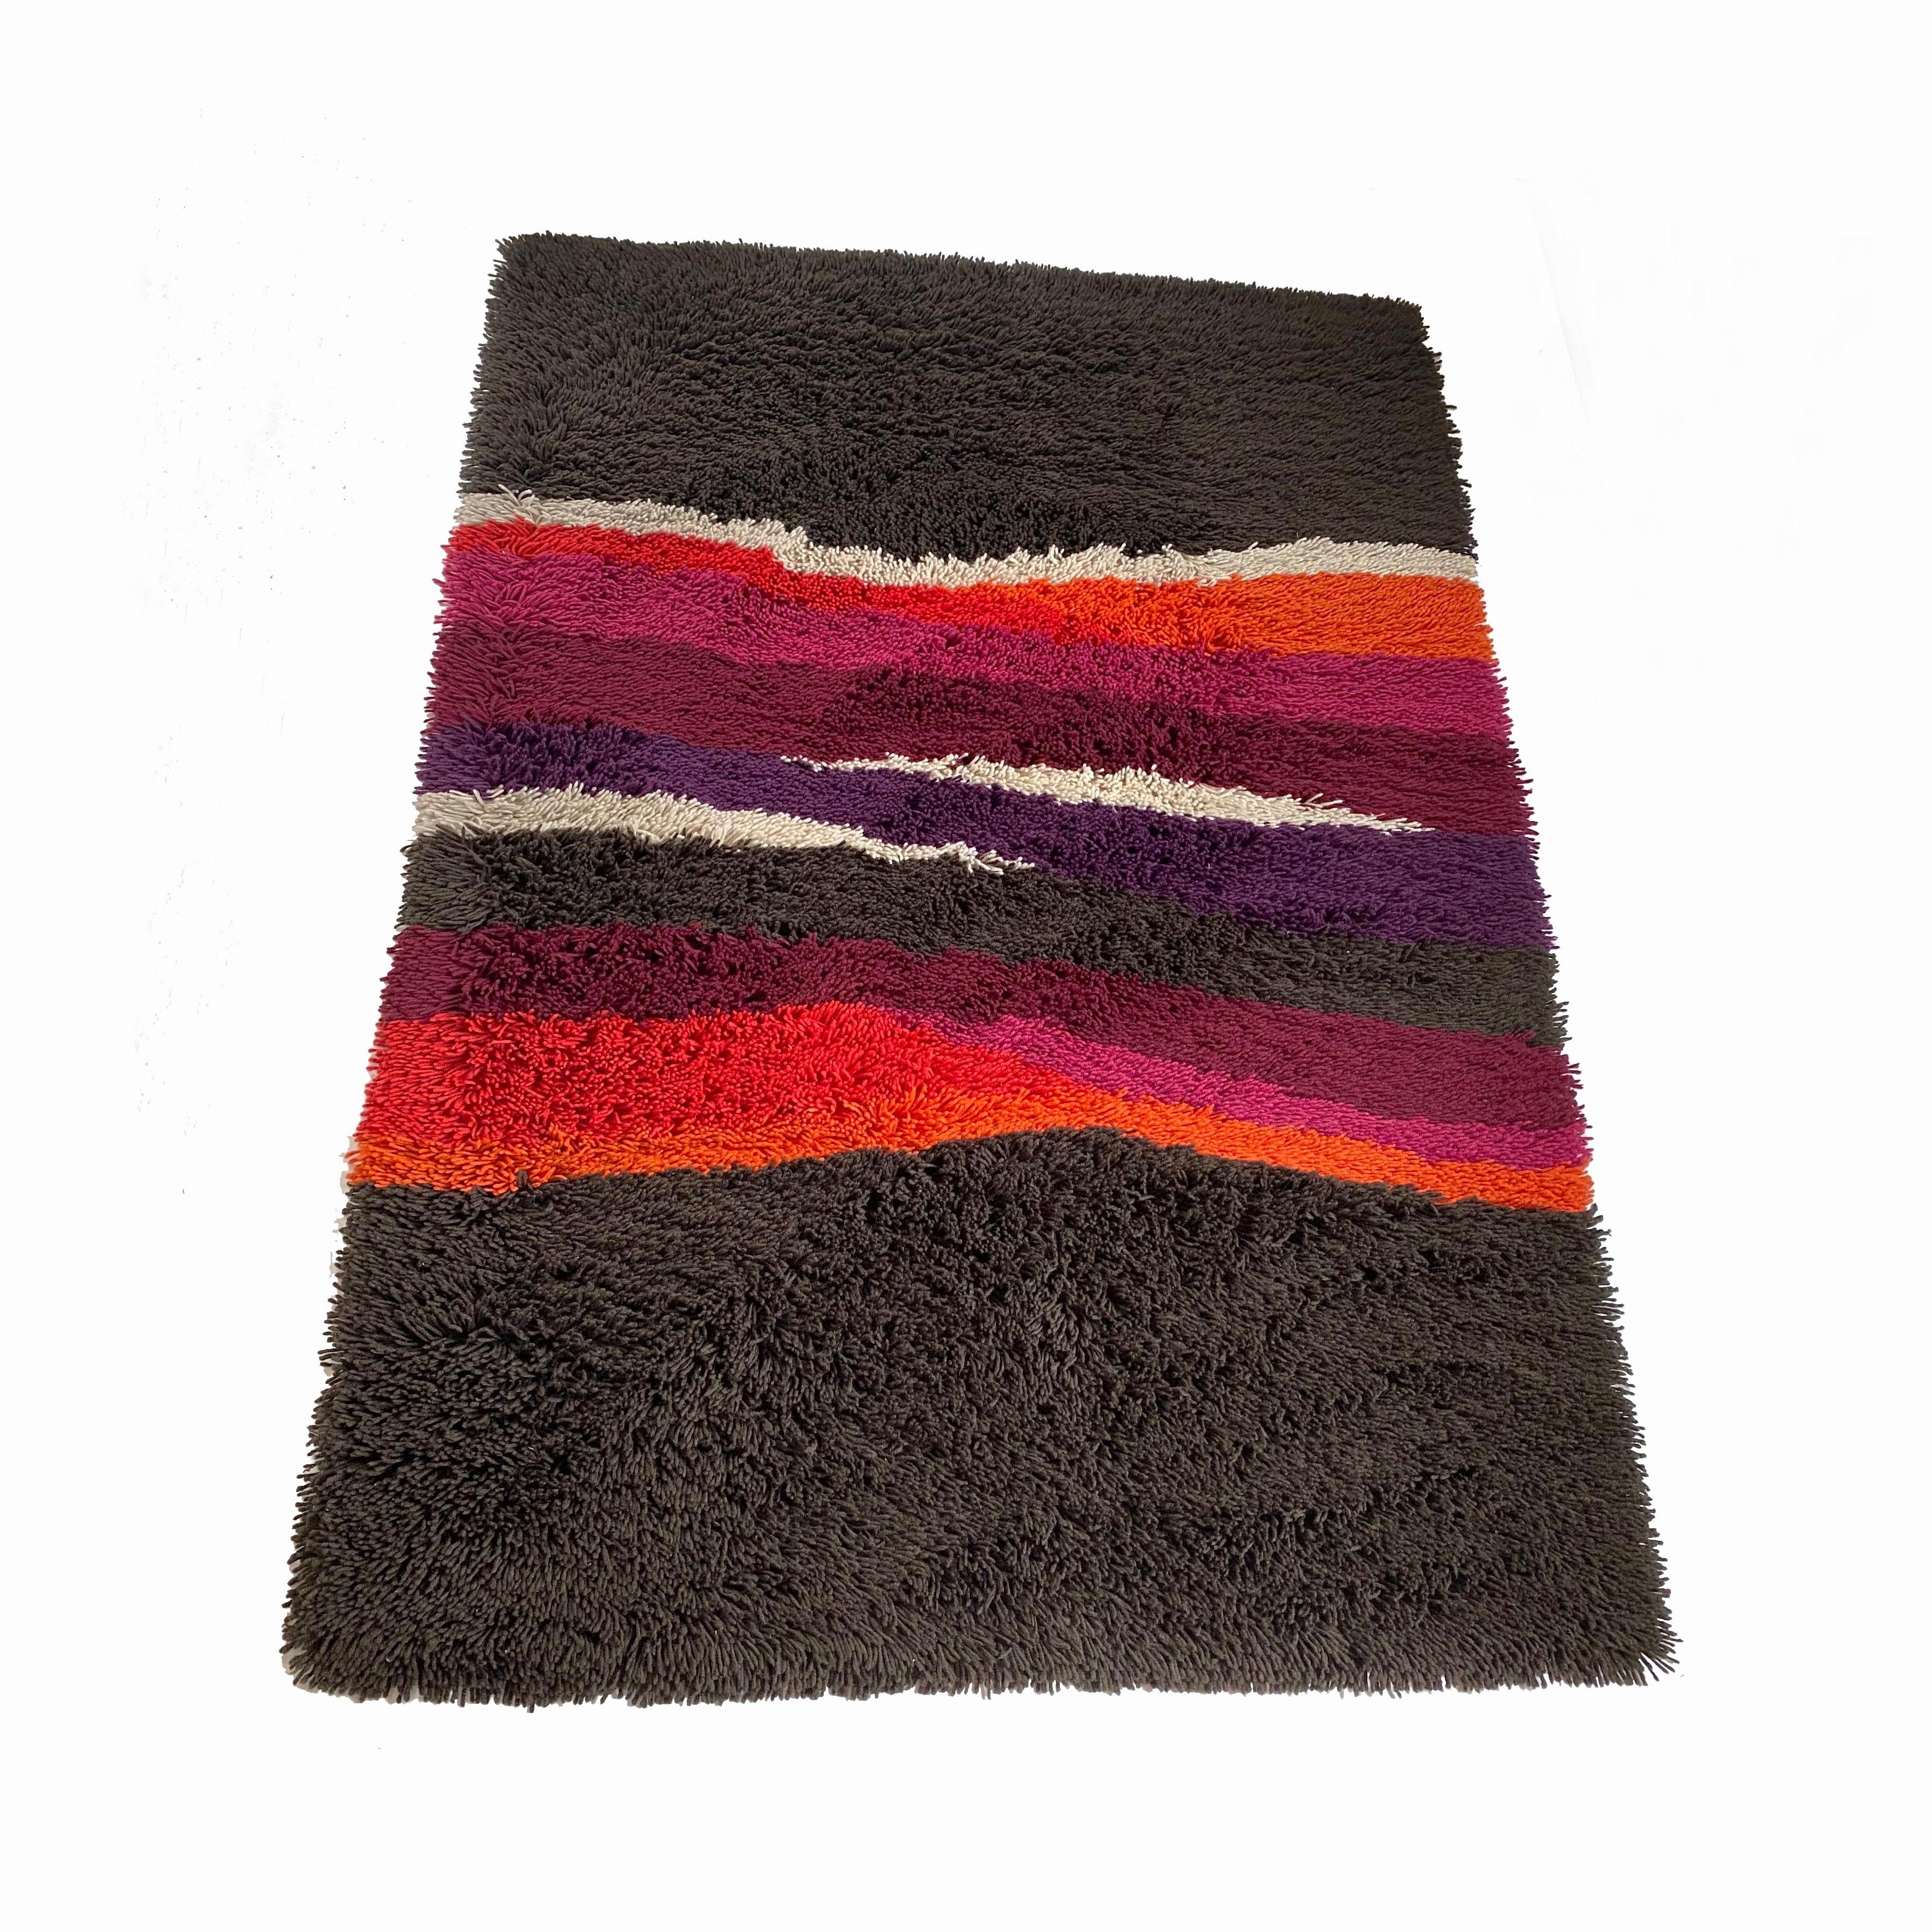 Mid-Century Modern Vintage Colorful Stripes Panton Style High Pile Rug by Desso, Netherlands, 1970 For Sale